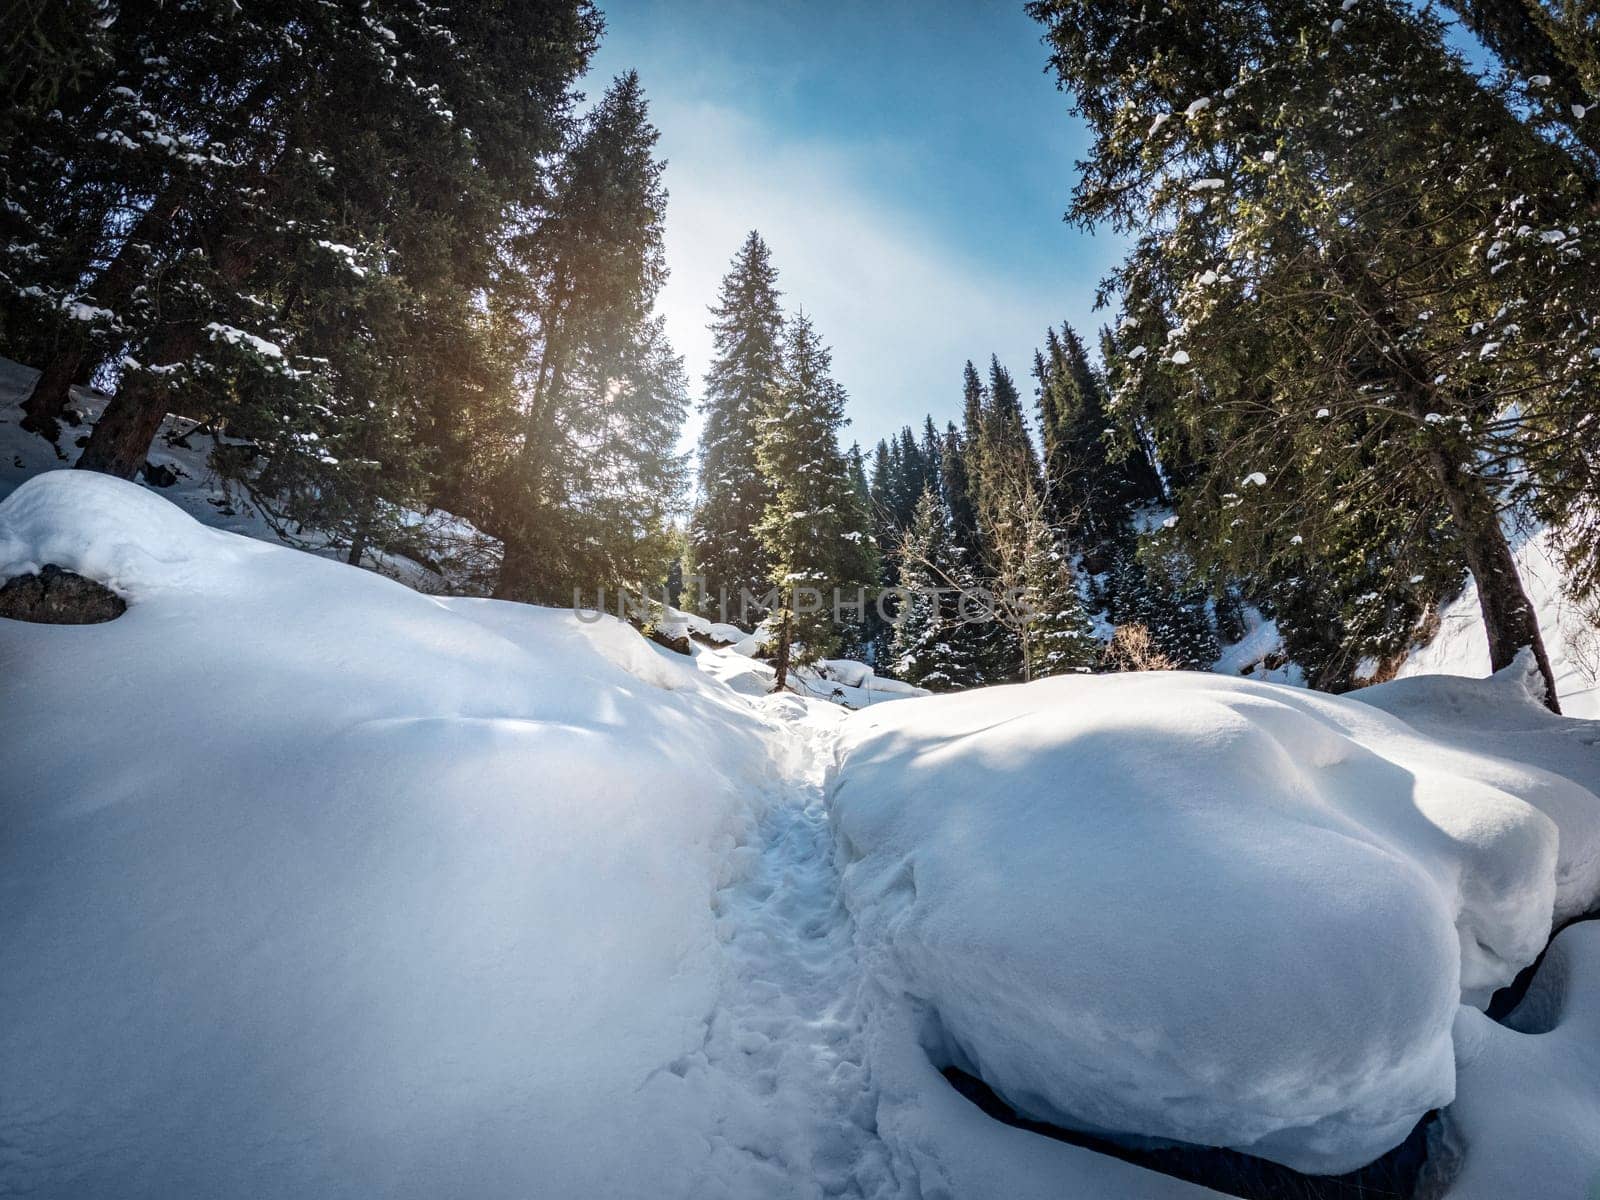 Scenic winter hiking trail through incredible snow-covered forest in the mountains. Kazakhstan nature.